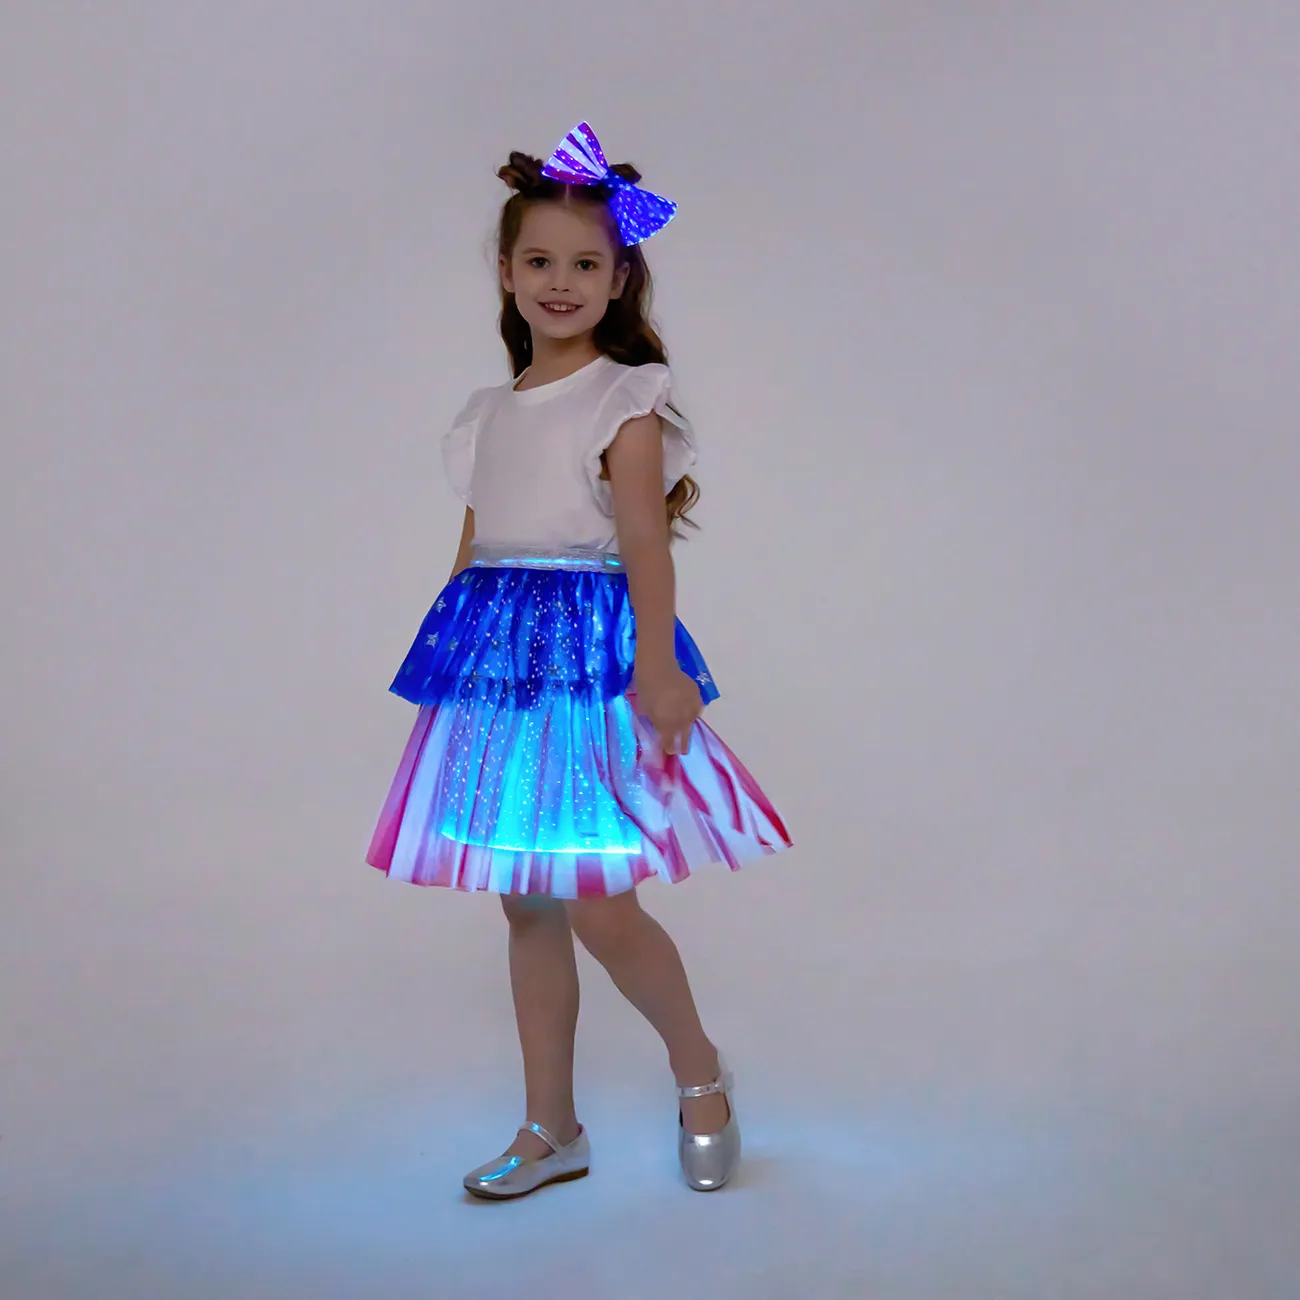 Go-Glow Light Up Contrast Skirt with Star Glitter Including Controller (Battery Inside) Dark blue/White/Red big image 1